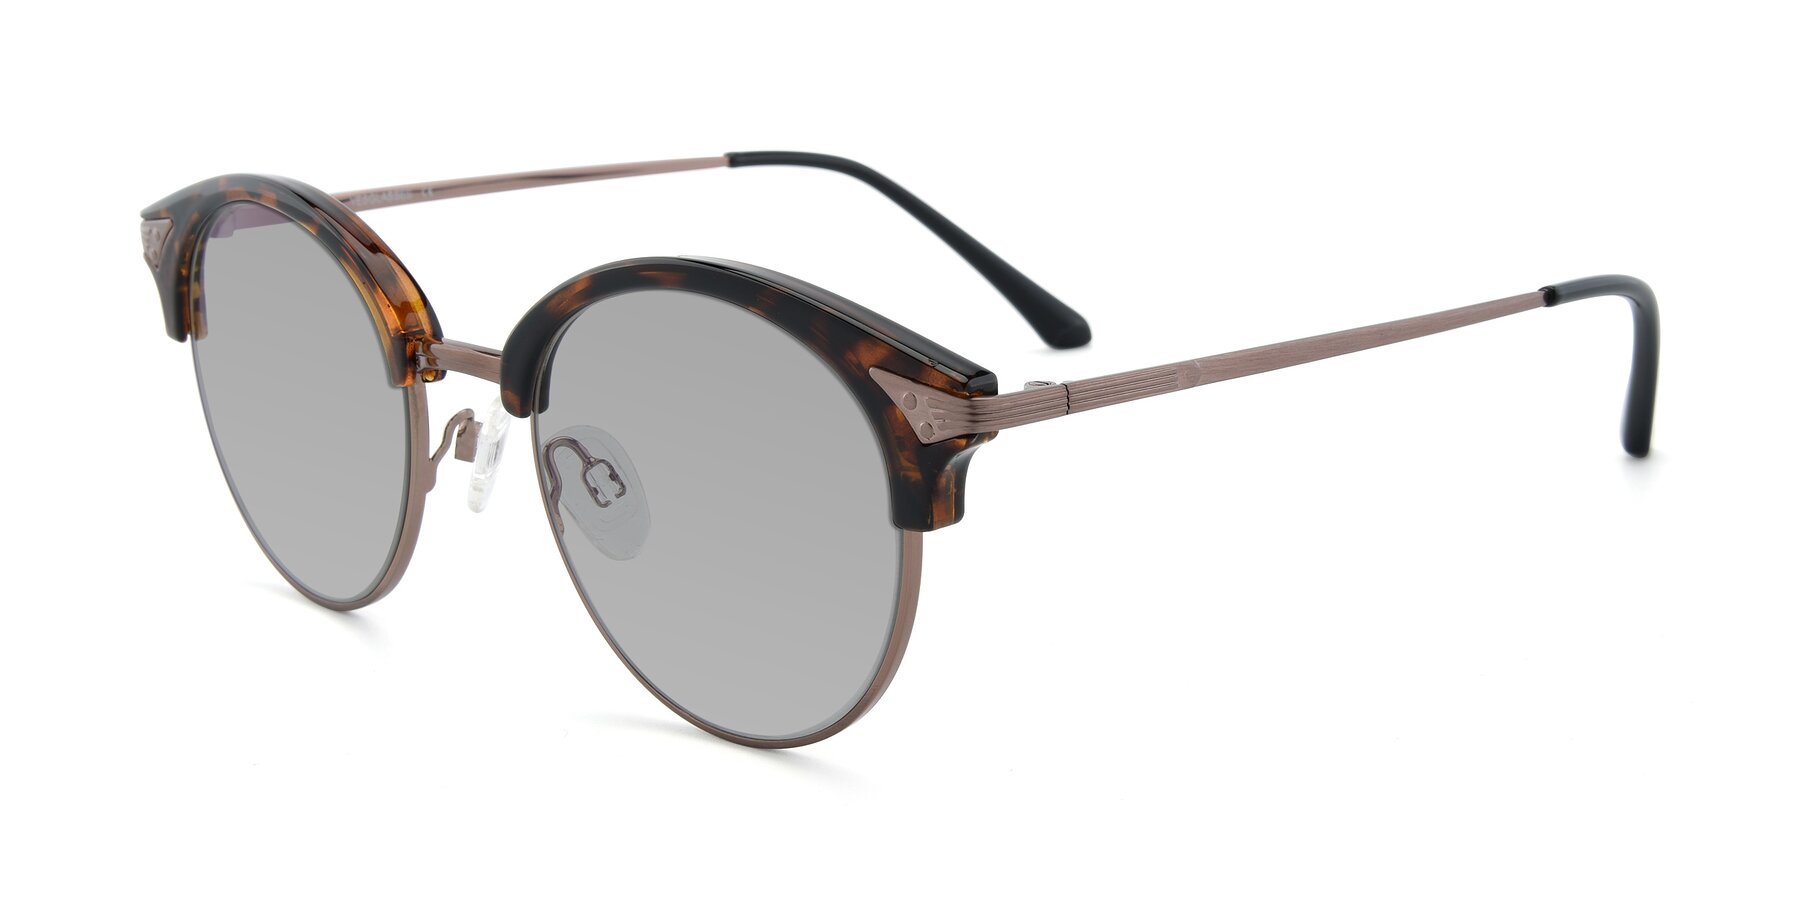 Angle of Hermione in Tortoise-Brown with Light Gray Tinted Lenses